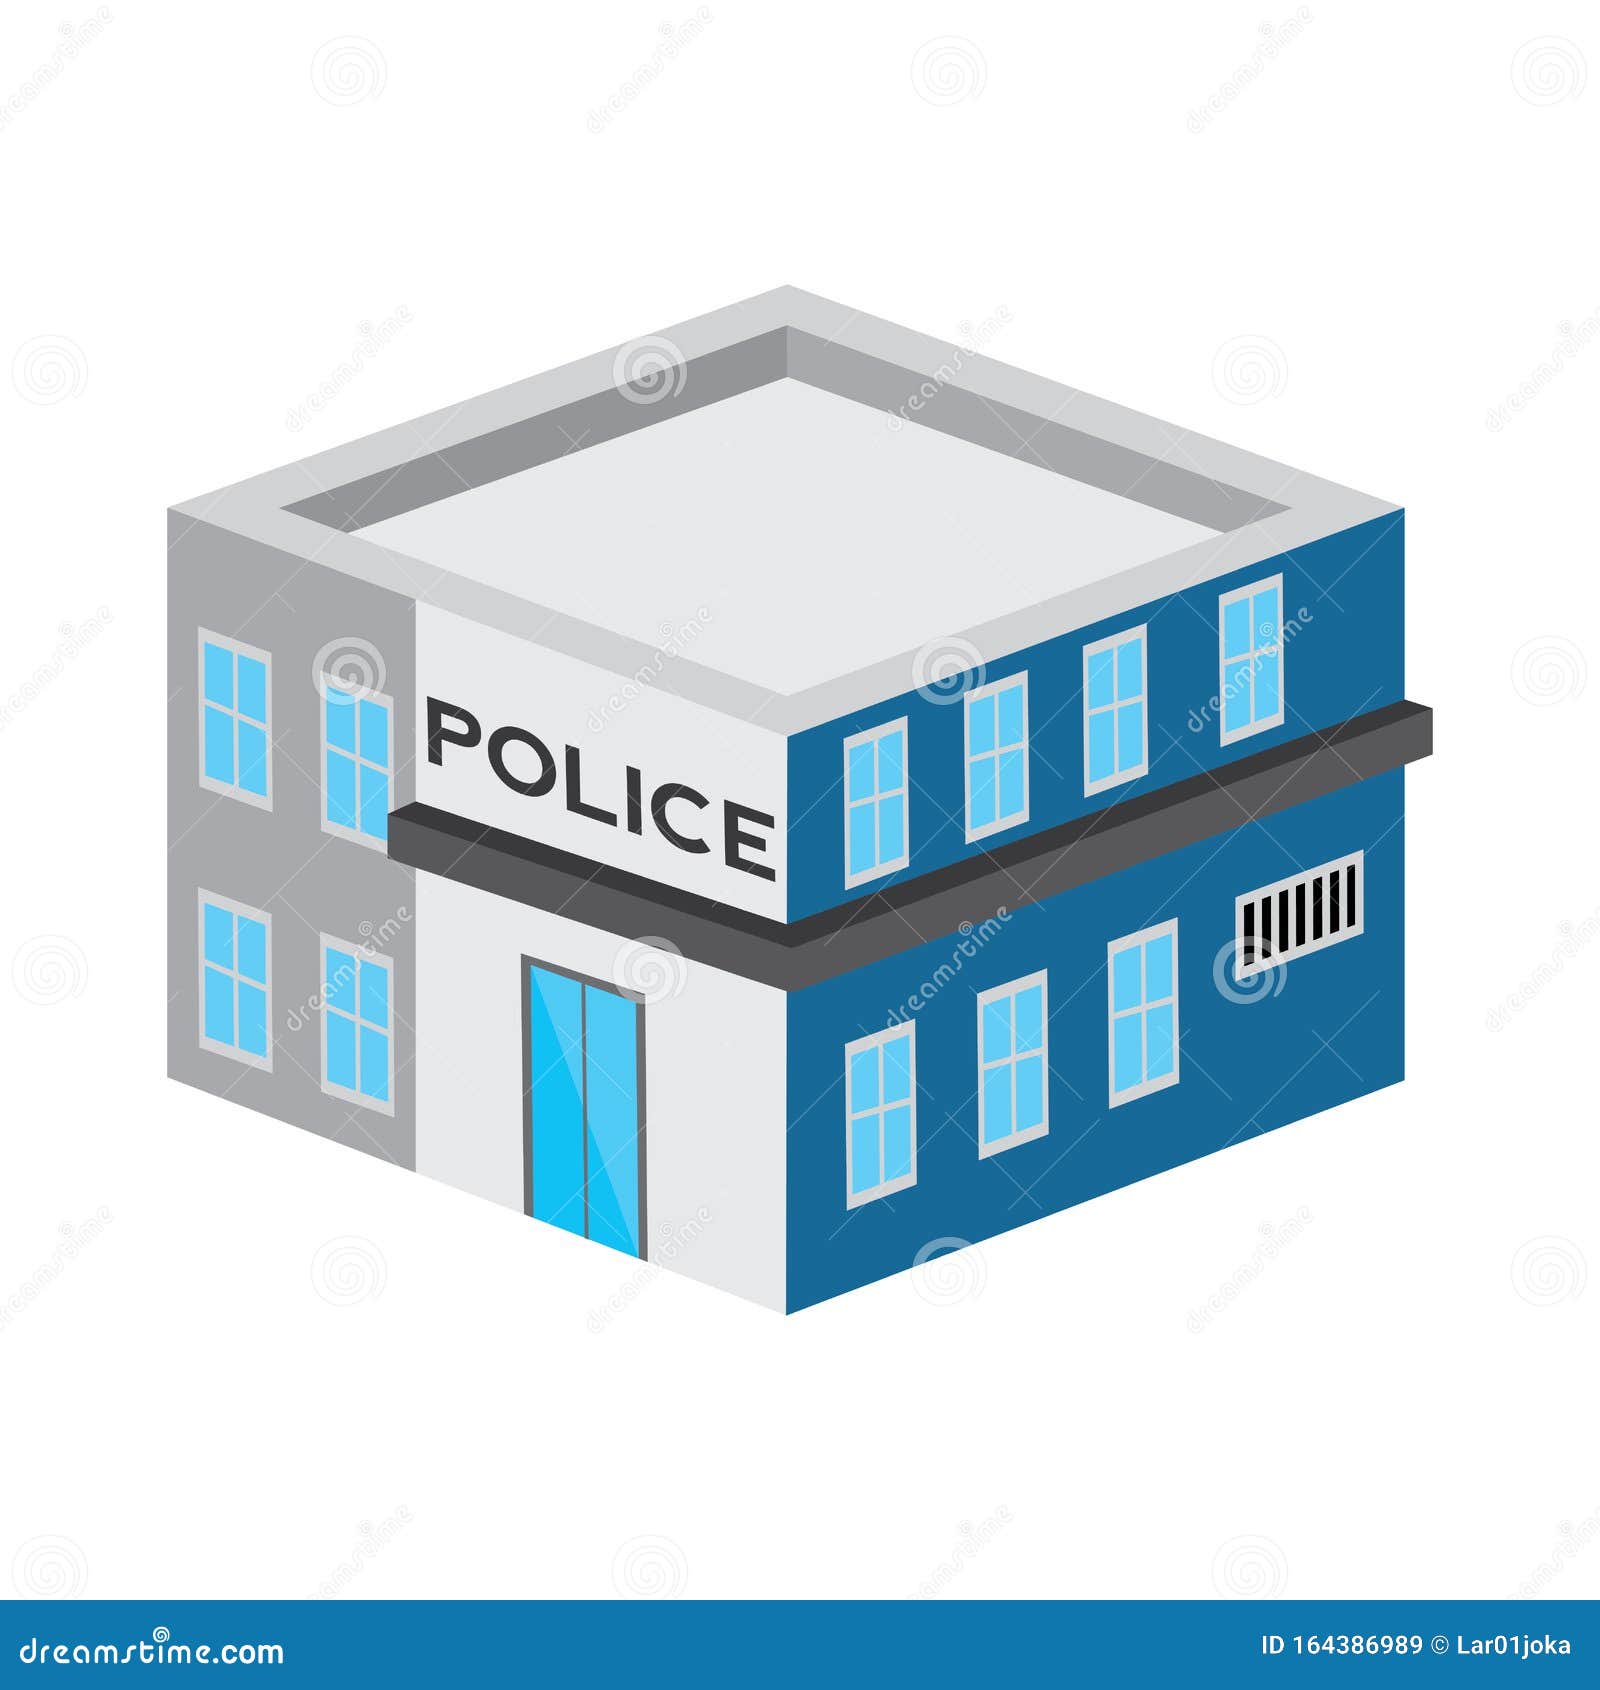 3D police station stock vector. Illustration of clipart - 164386989